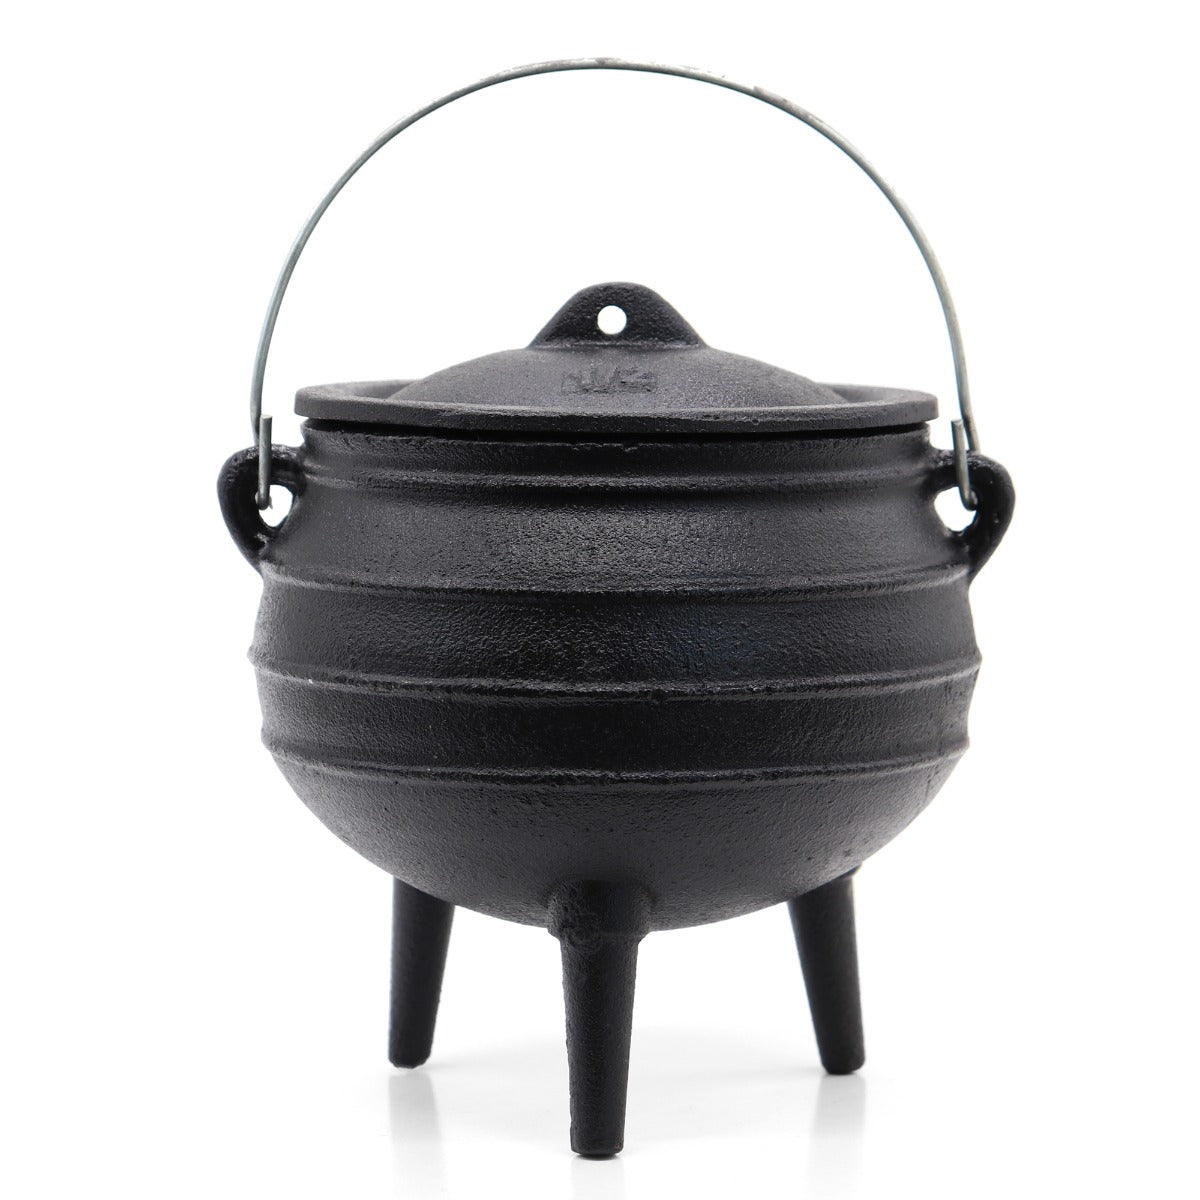 Get 1/2 Pure Cast Iron Potjie